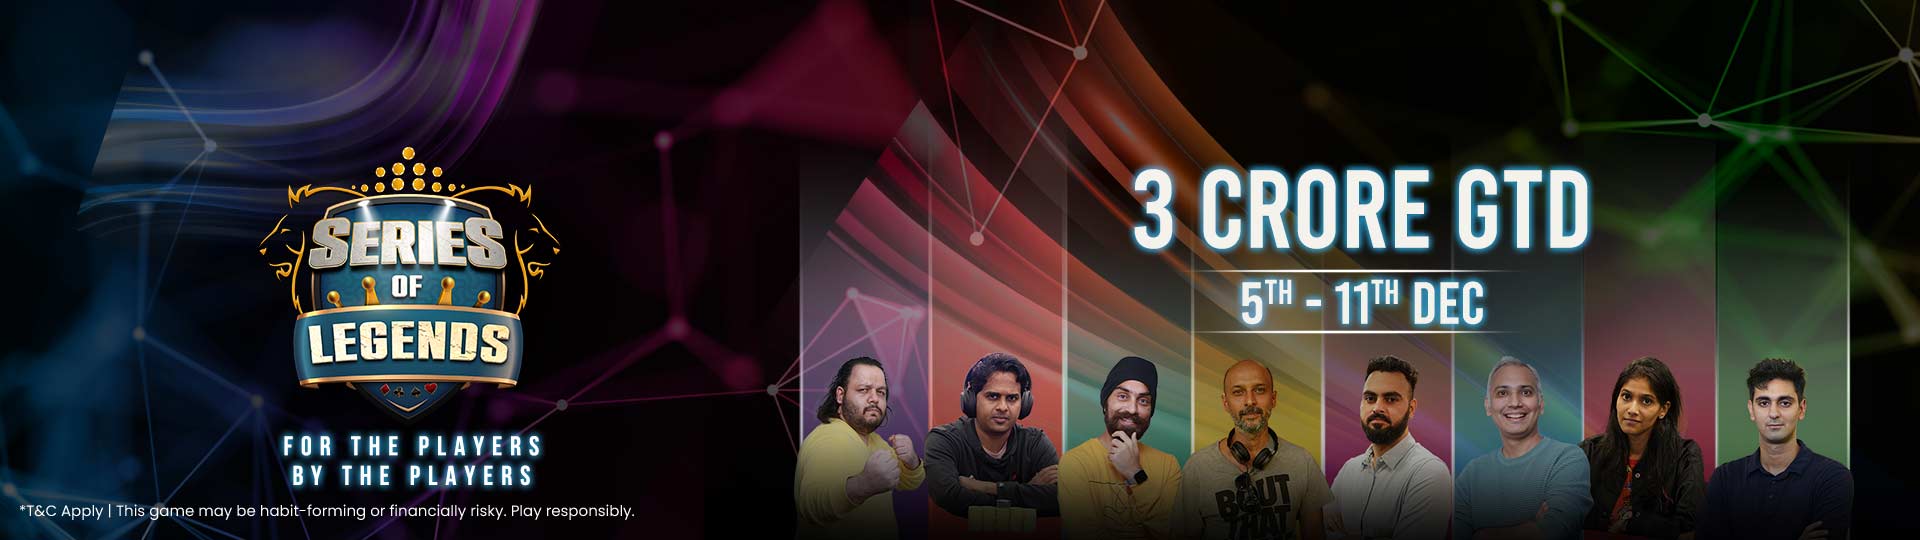 Series of Legends is back with Massive 3 Cr GTD